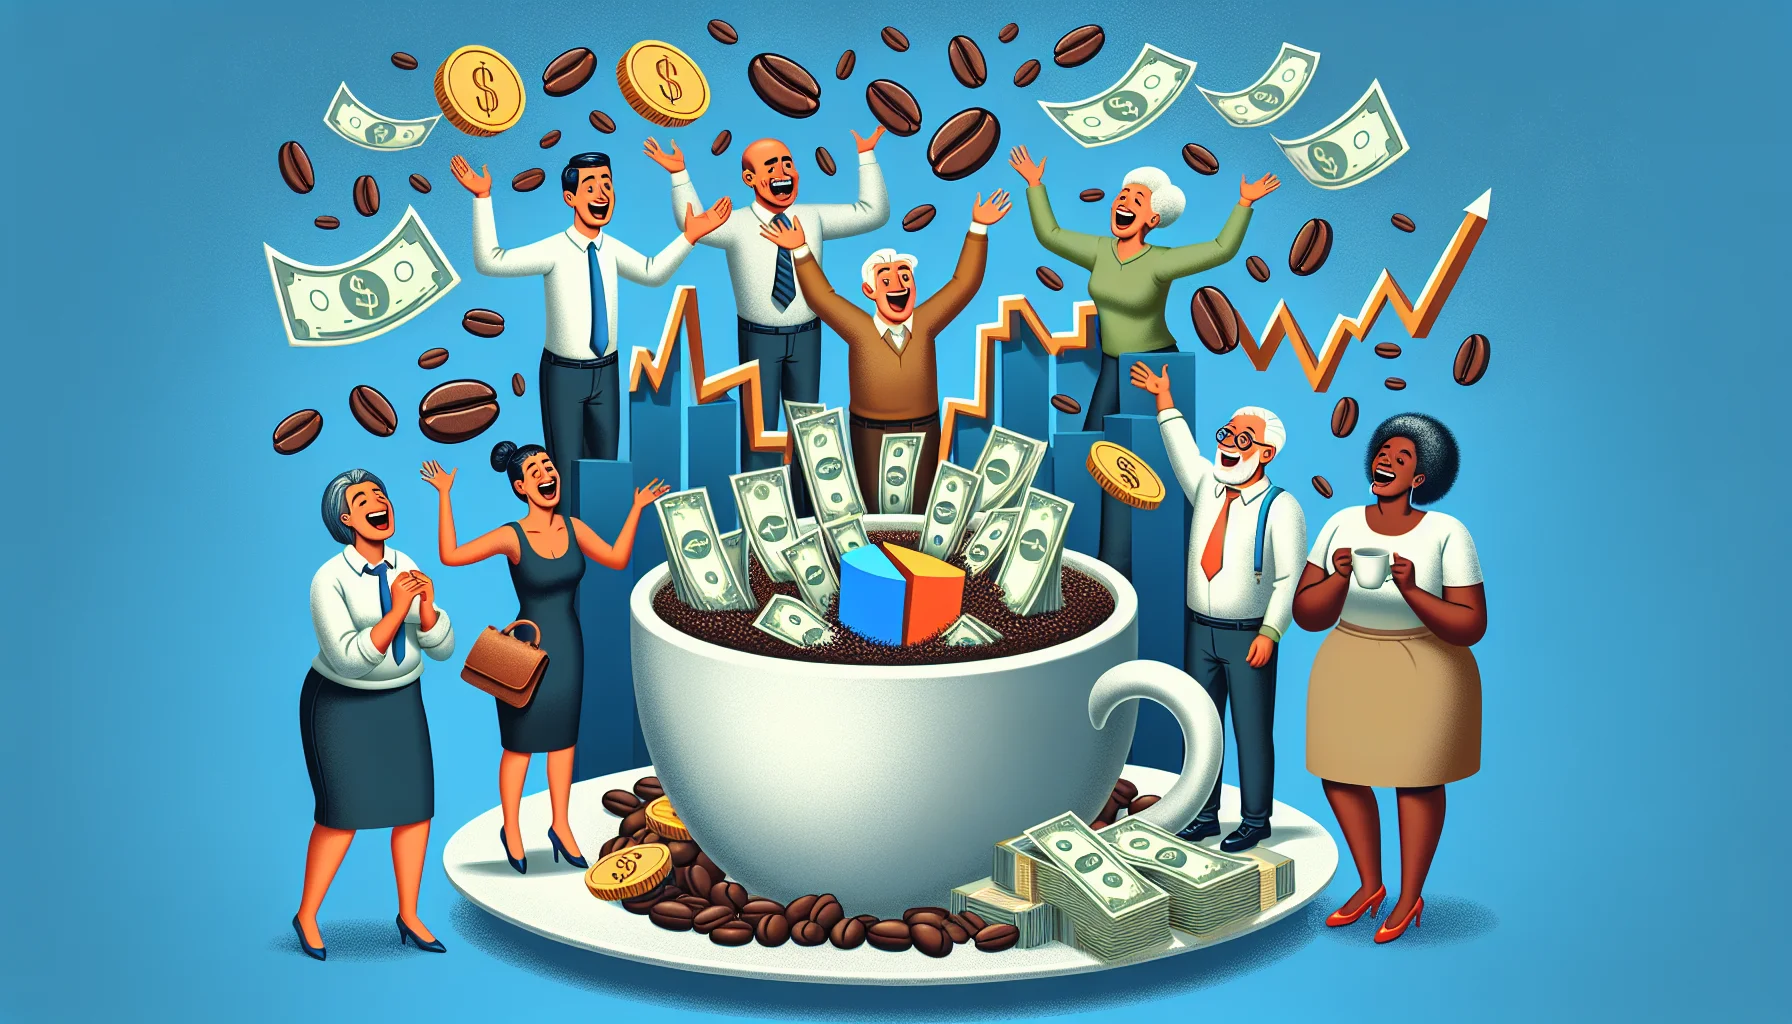 Create an amusing image of a stylized physical representation of an 'espresso demat account', perhaps a coffee cup with charts, graphs, and figures floating above it. Commodities like beans, money bills, and coins are pouring out of it into a saucer like profits. Around the arrangement, a group of diverse individuals: a middle-aged Hispanic woman, a young South Asian man, a Caucasian senior man, and a Black woman in her thirties, are happily interacting, laughing, and excited. The scene should convey a vibe of fun and profitability associated with investing.